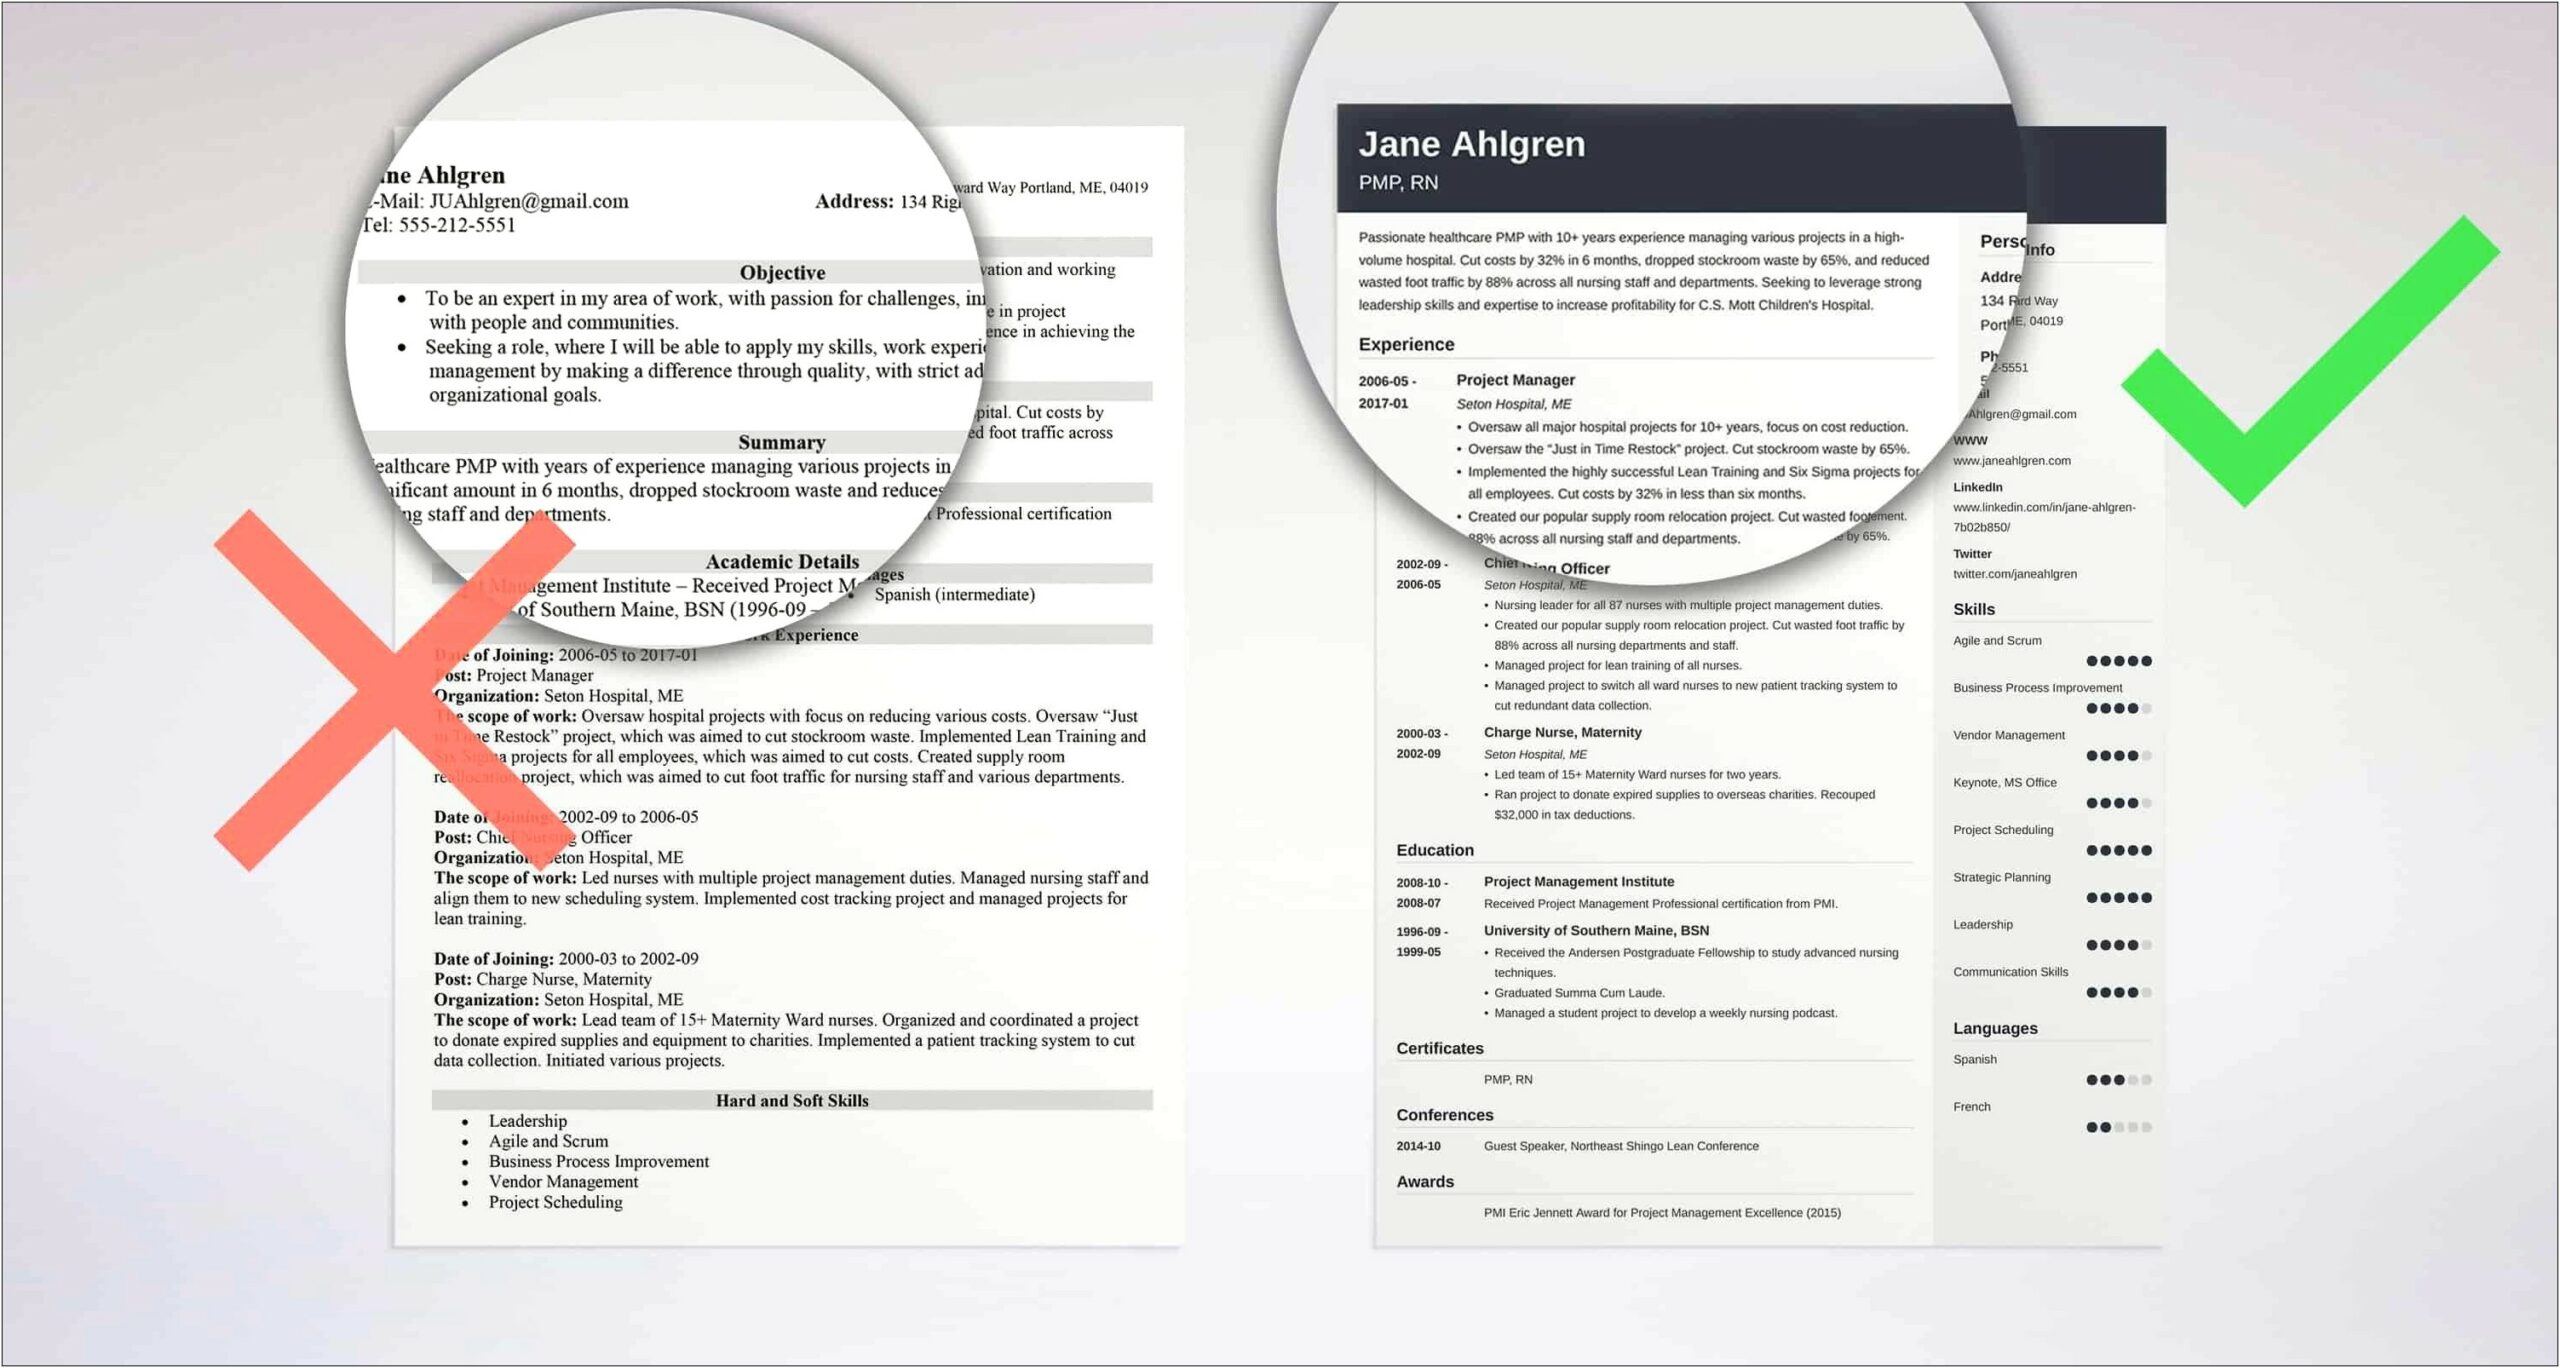 Where To Include A Summary In Your Resume